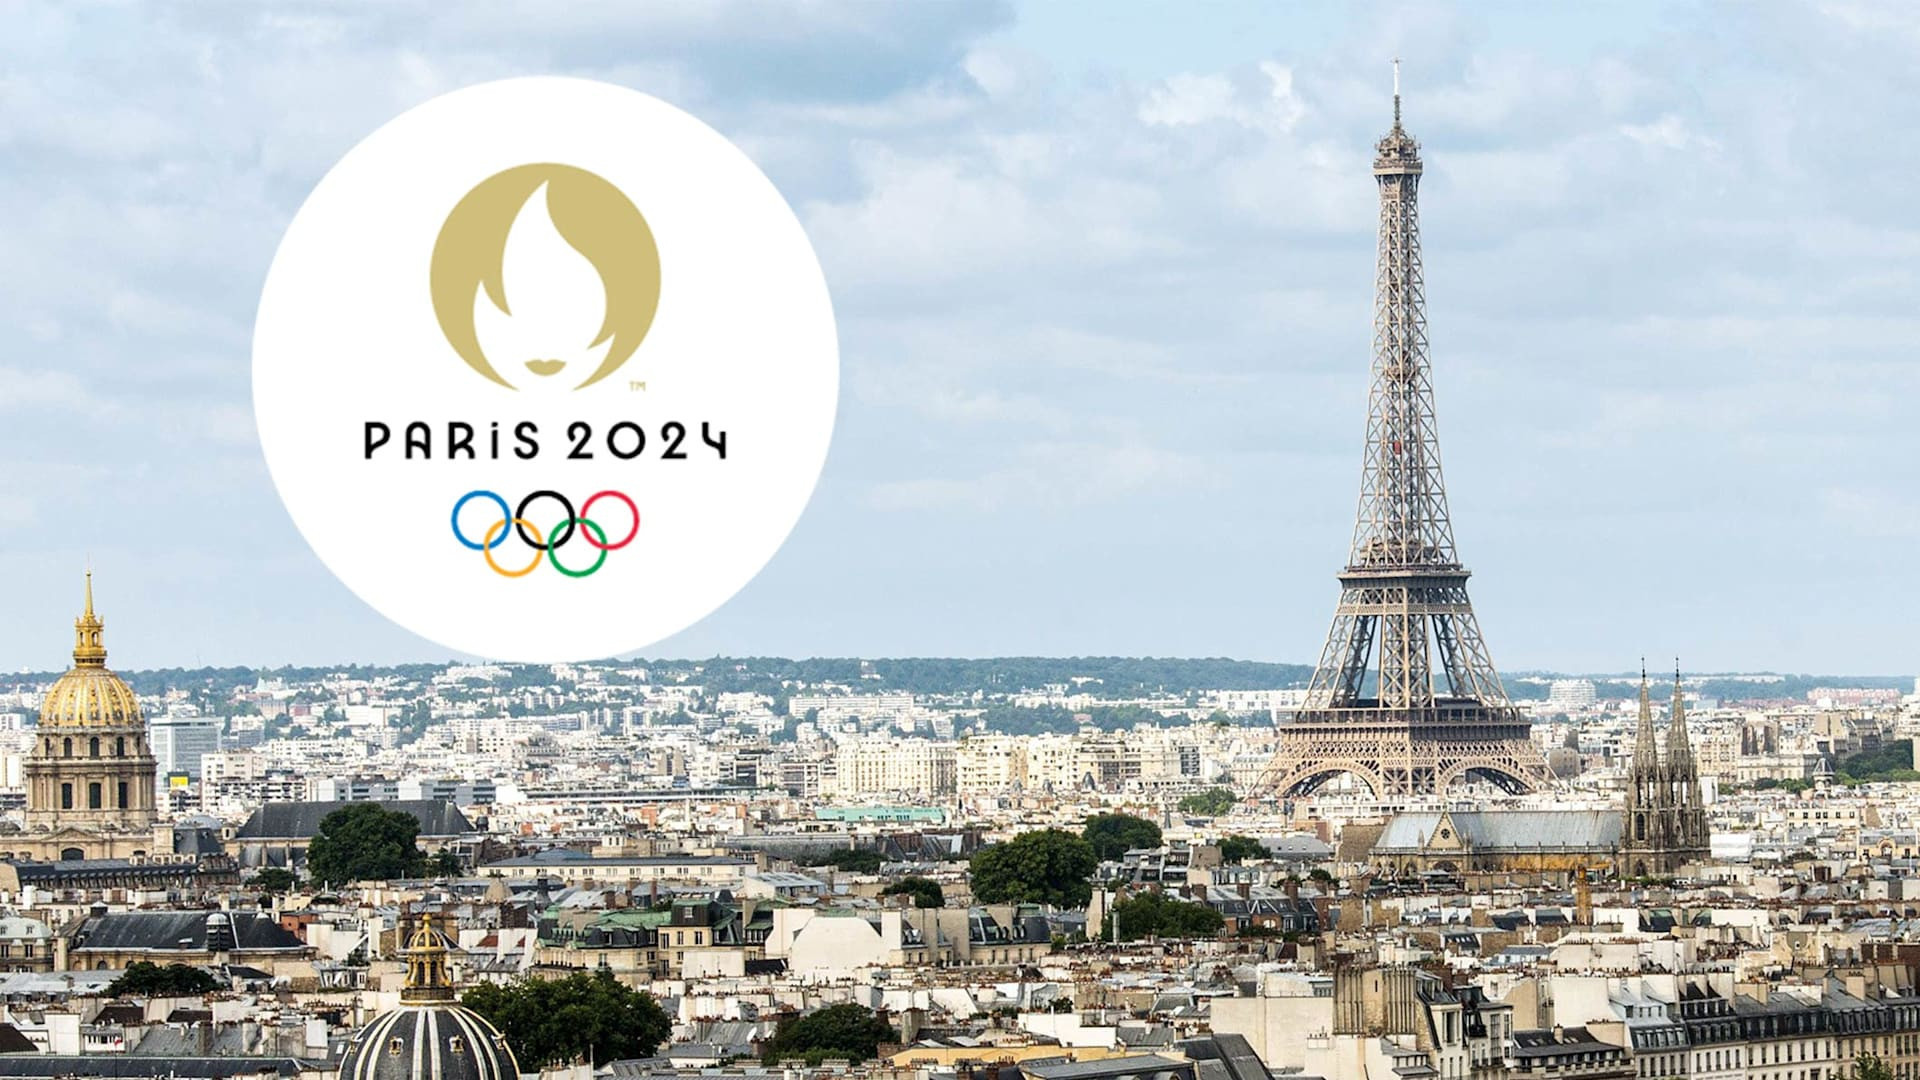 Paris 2024 tickets may rise beyond 13.4 million when sessions are finalised